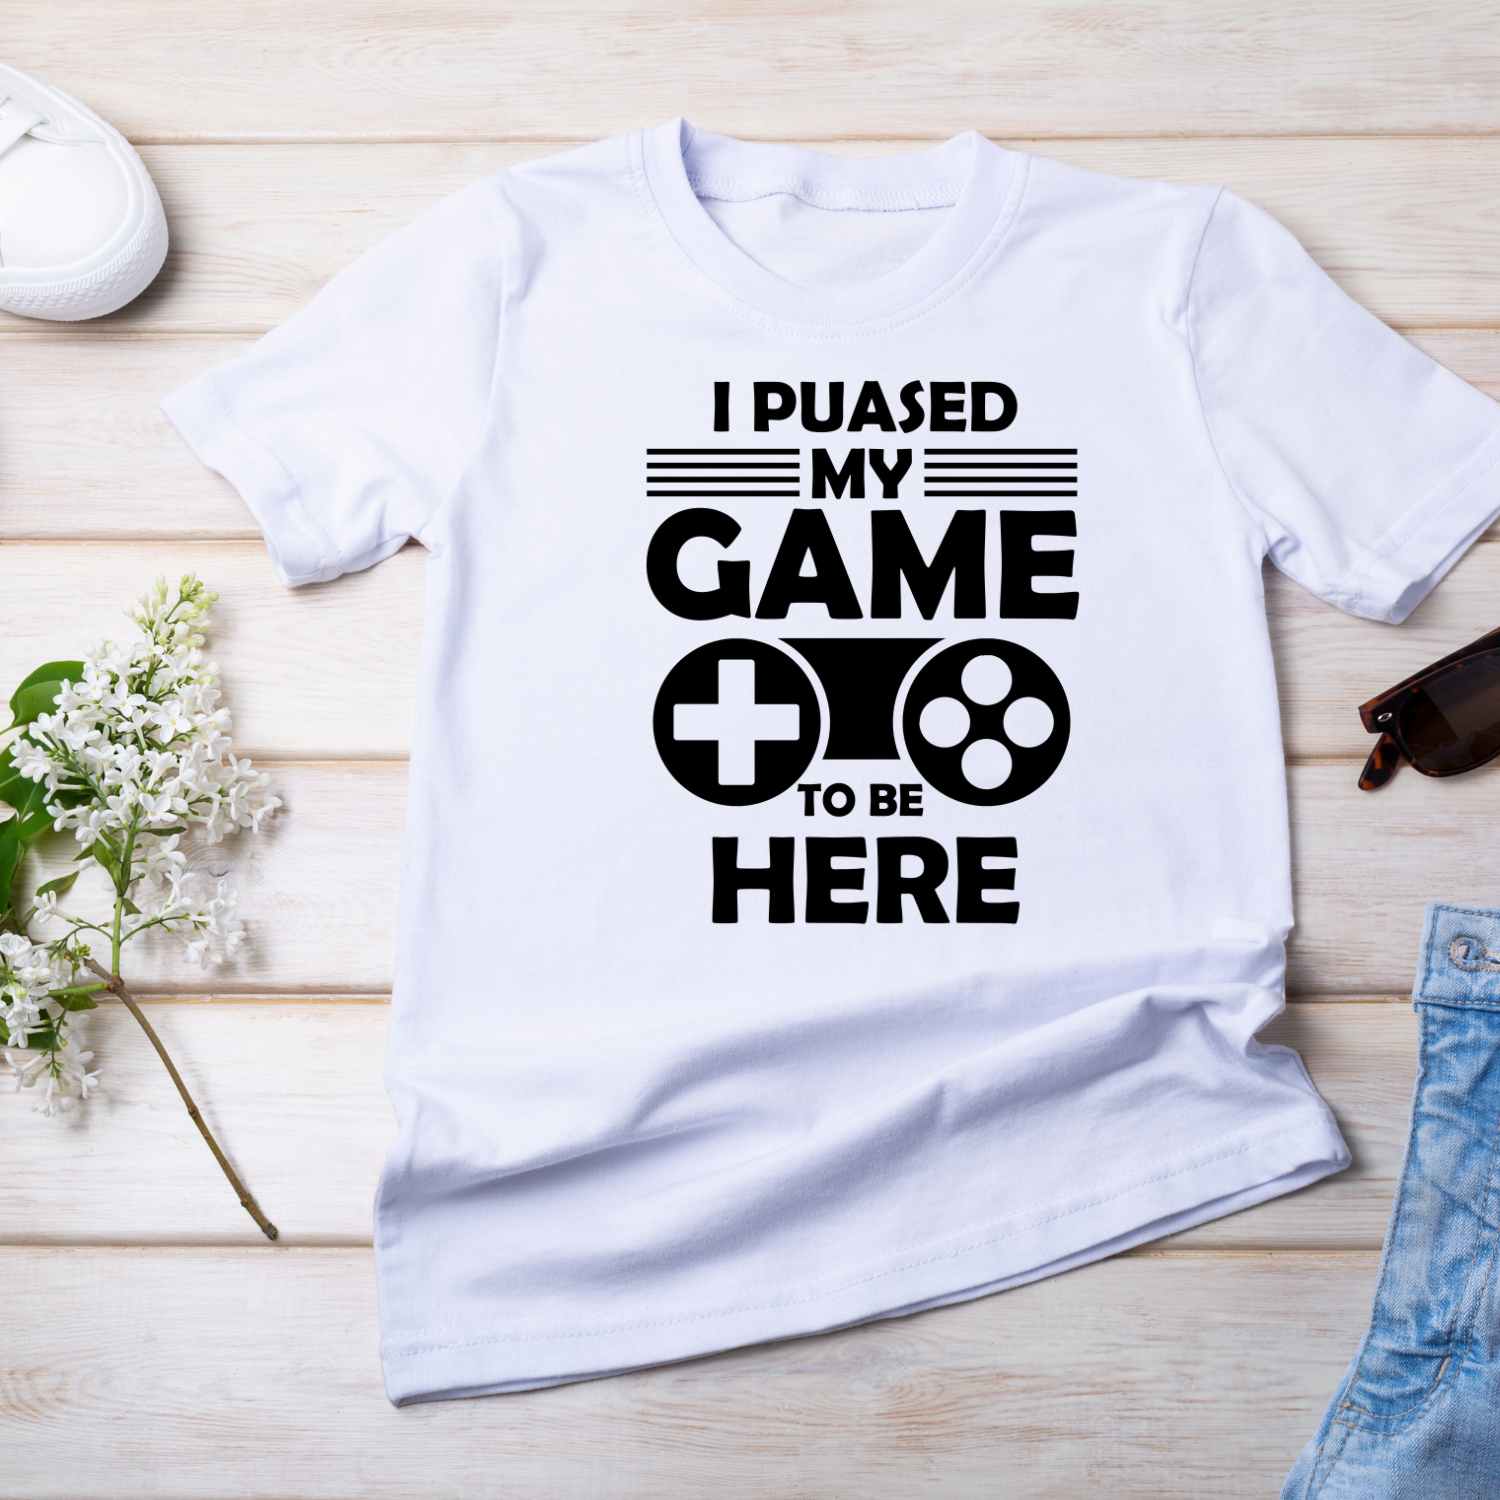 "Pause no more! 'I Paused My Game to Be Here' t-shirt design awaits. Get ready to level up your style. Go grab it now!"